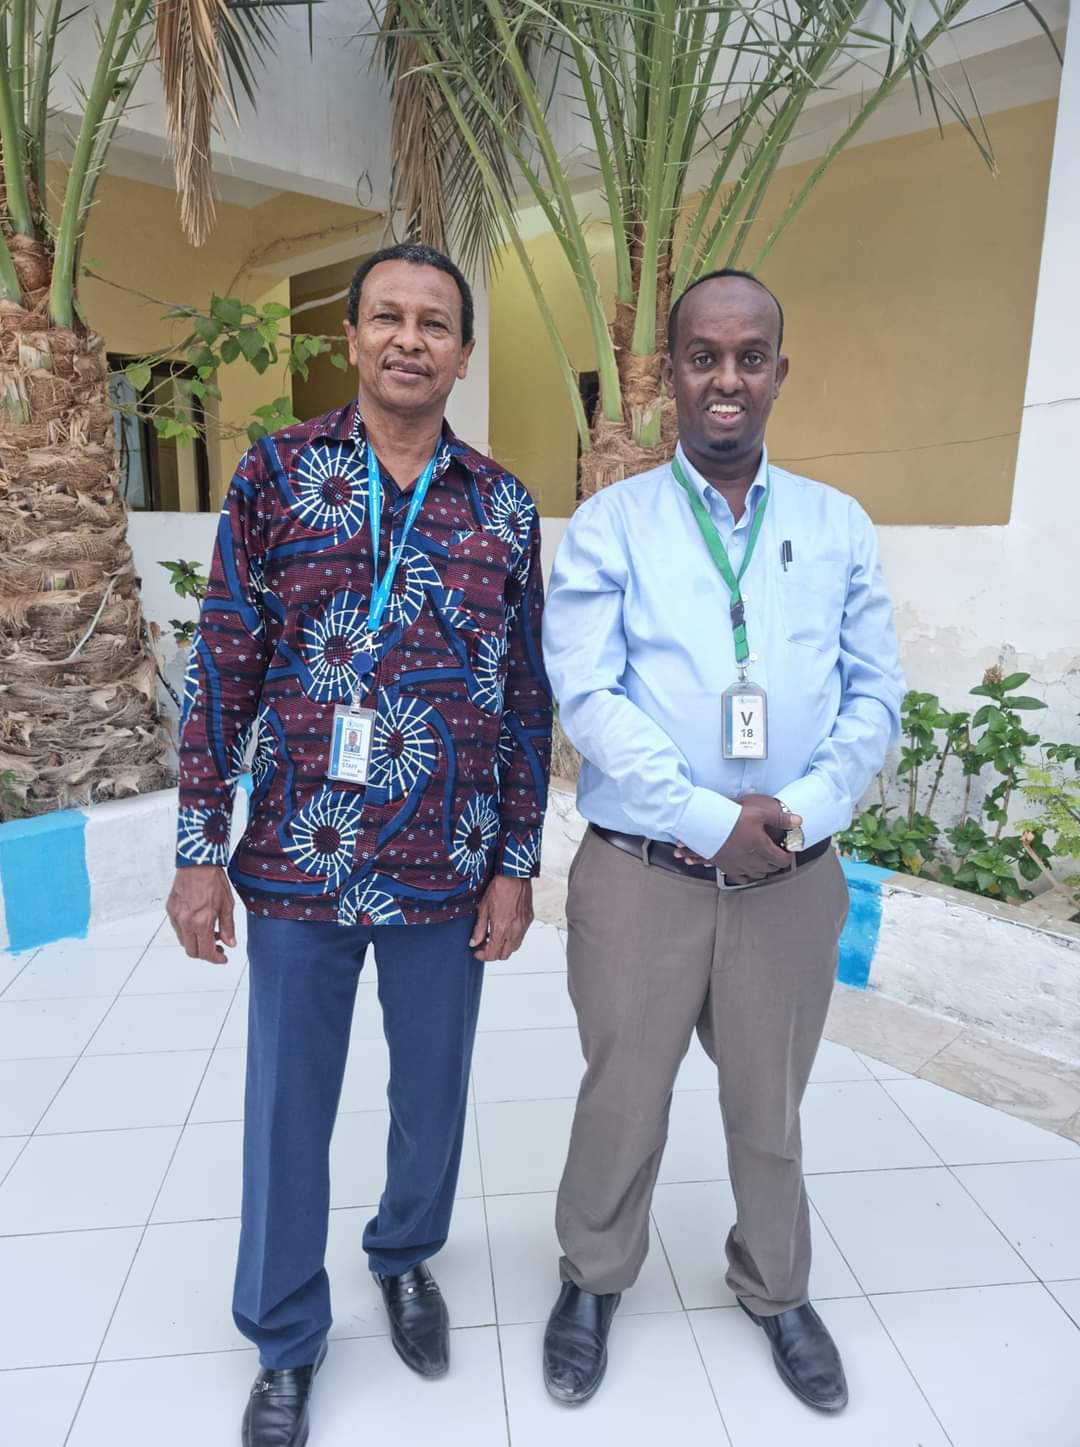 The Representative and Country Director of the World Food Programme (WFP) Somalia, Mr. met with the Executive Director of the national non-governmental organization HIDA